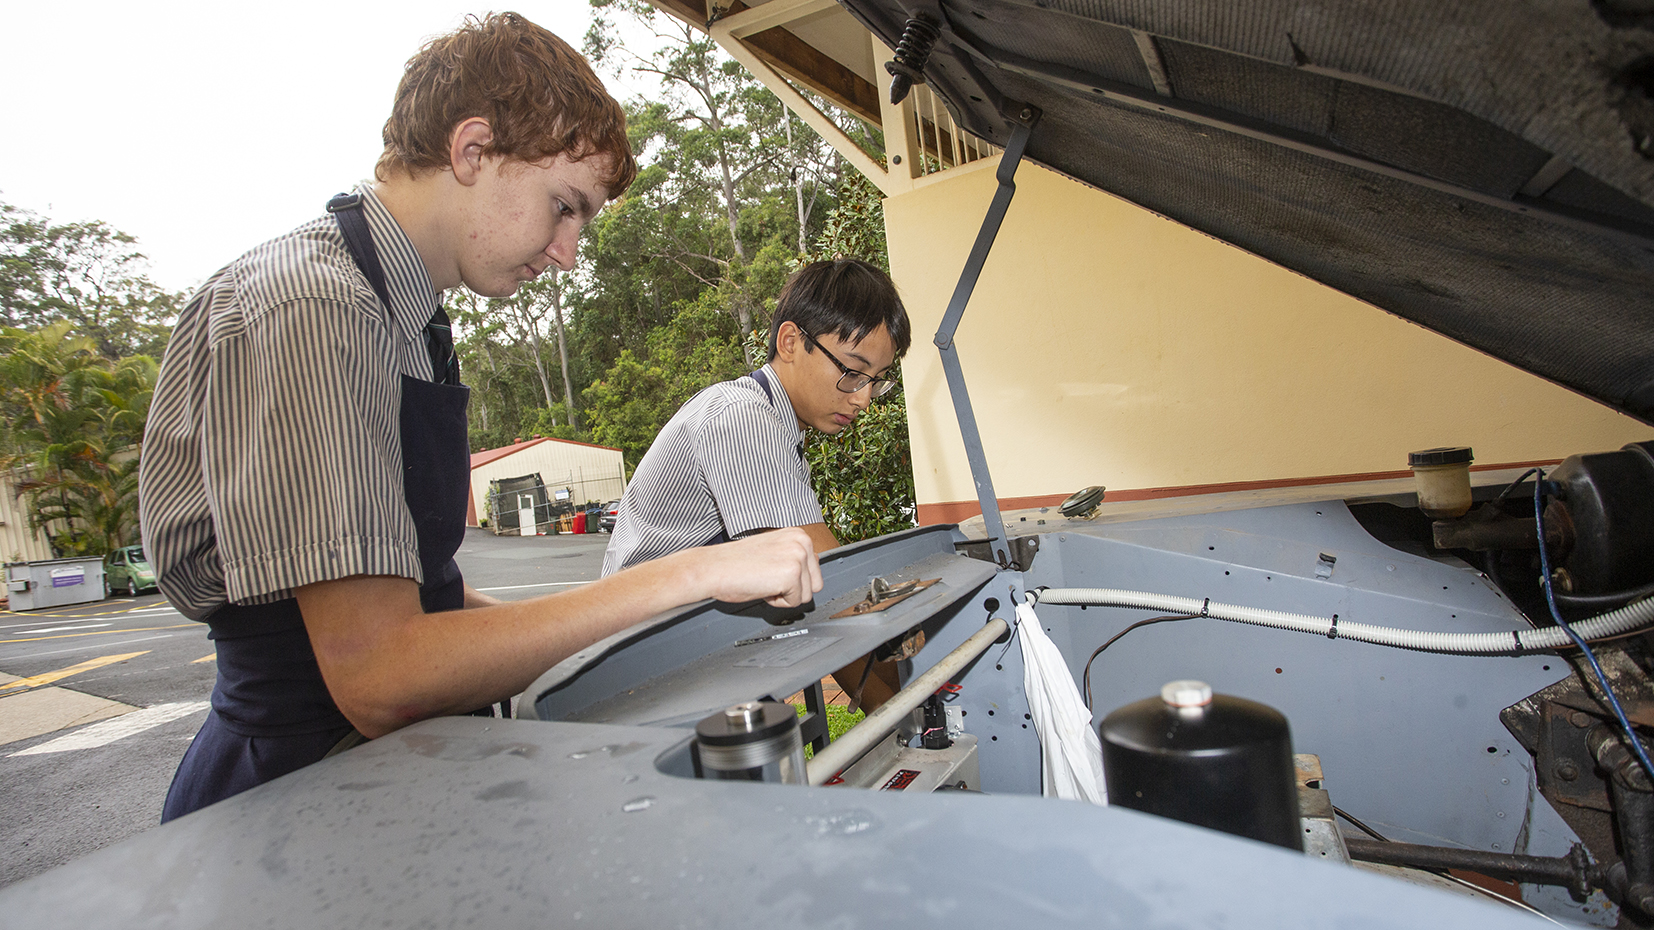 Queensland's Matthew Flinders Anglican College students at work on their 1974 Land Rover Series III with electric conversion